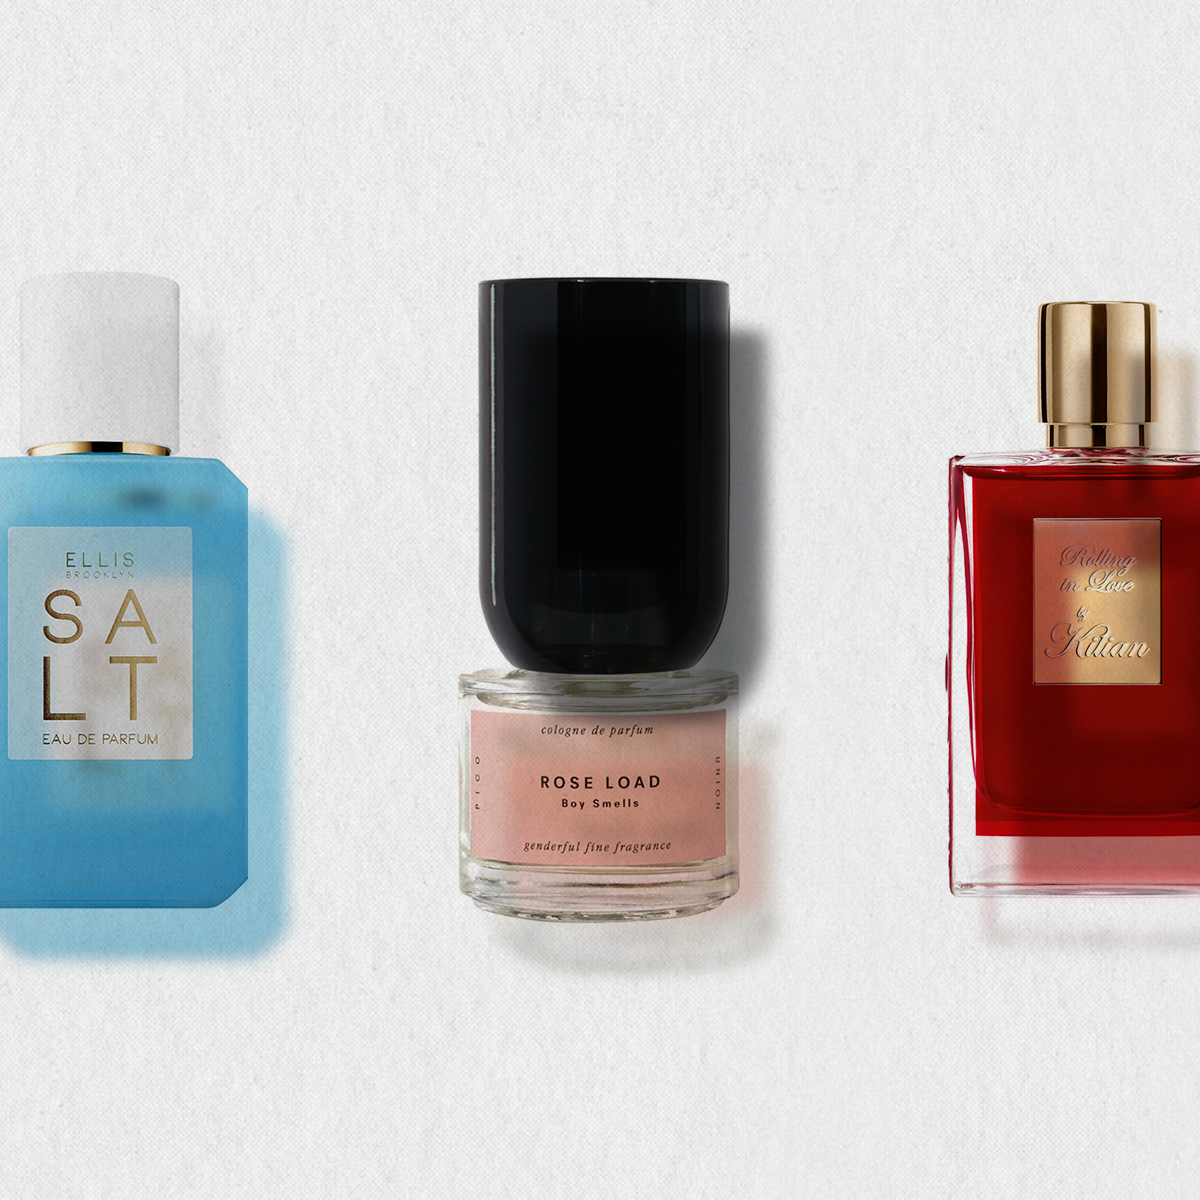 The 20 Best Perfume Brands Every Fragrance Lover Should Own